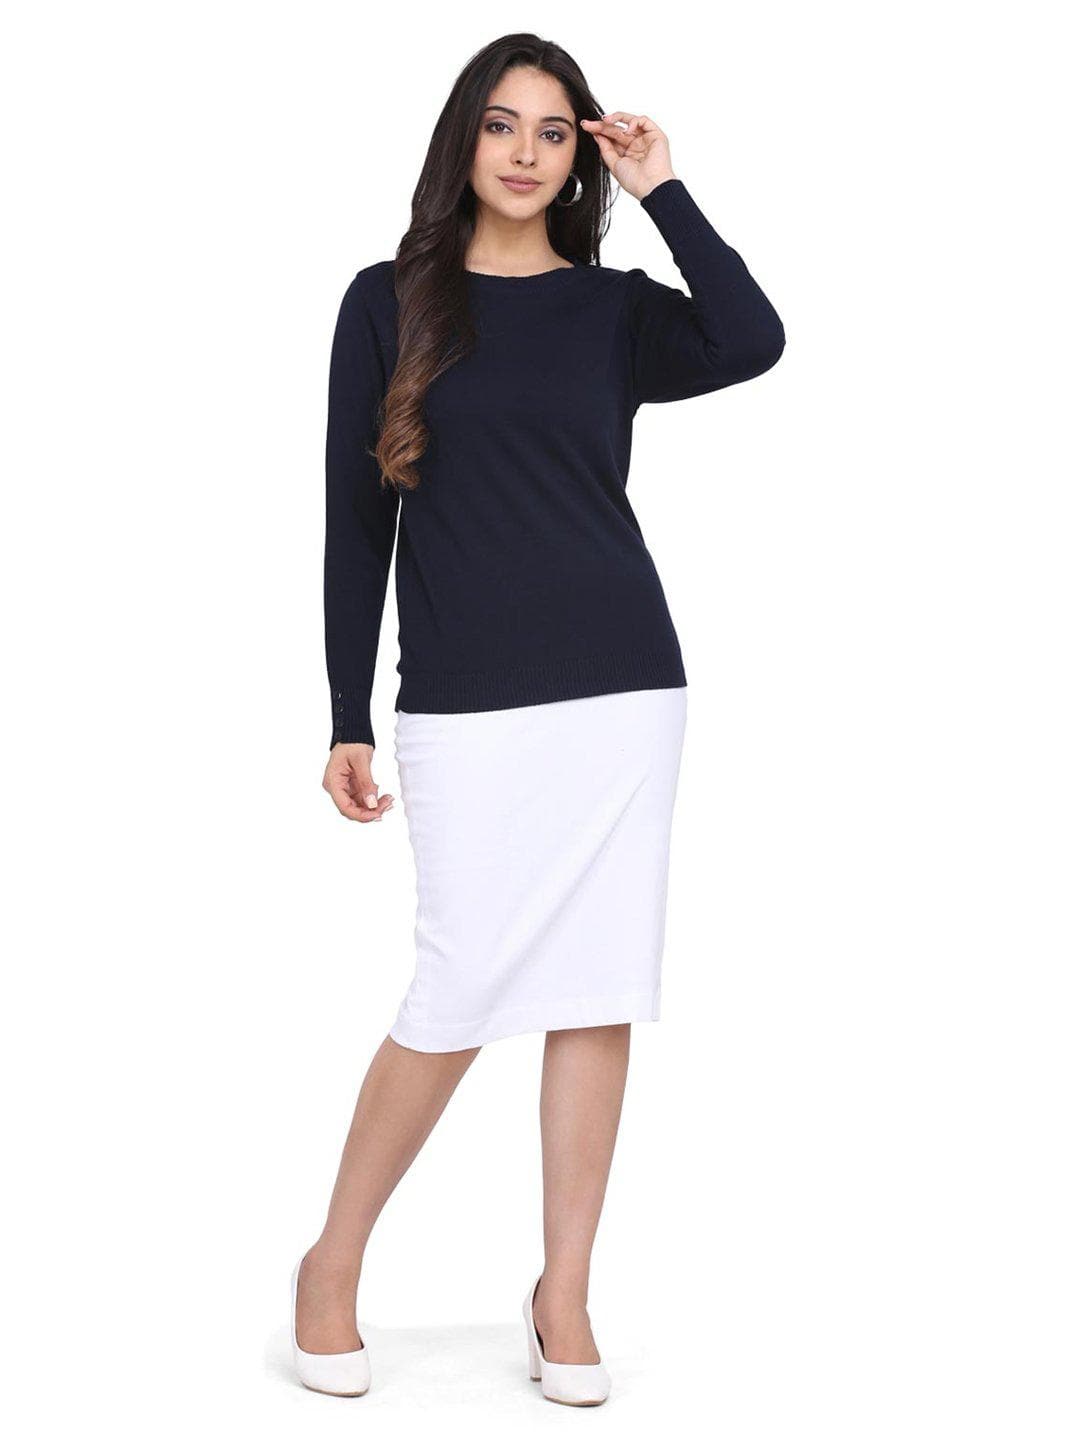 Cotton Pullover For Women - Navy Blue